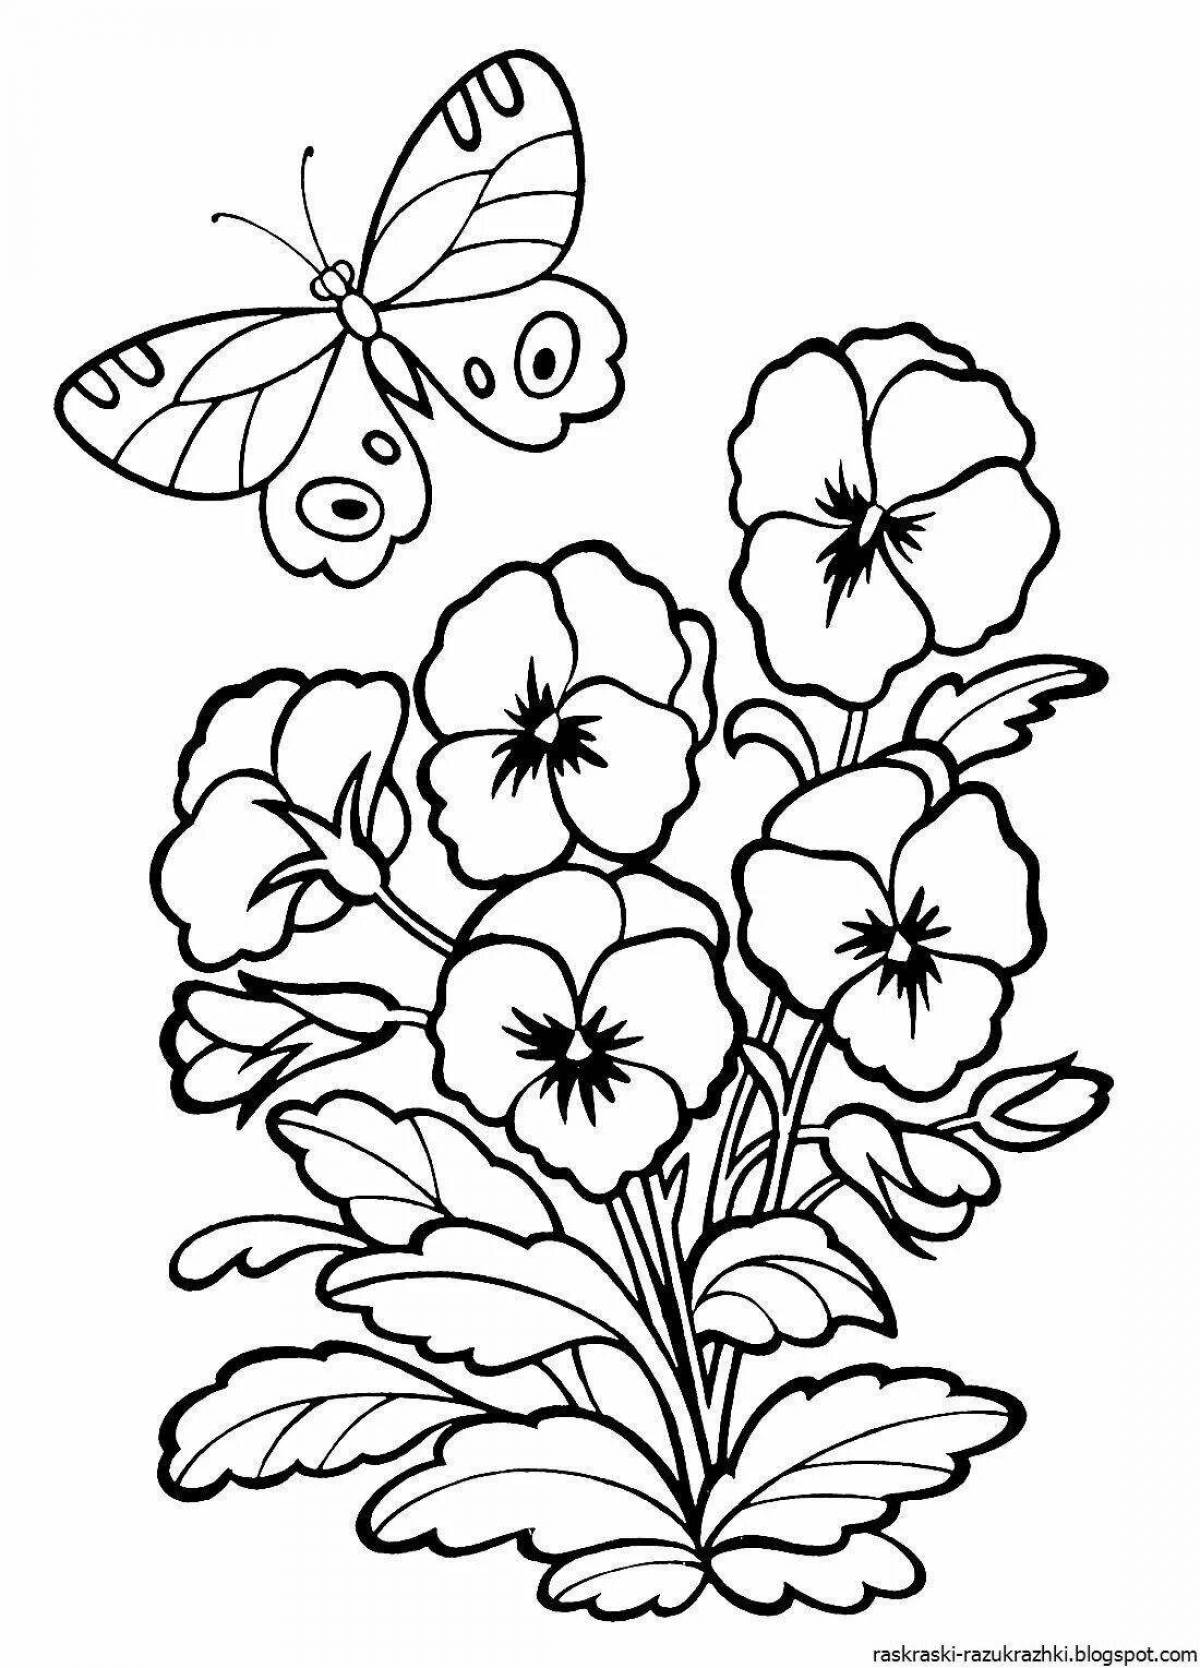 Adorable coloring pages flowers for children 7 years old